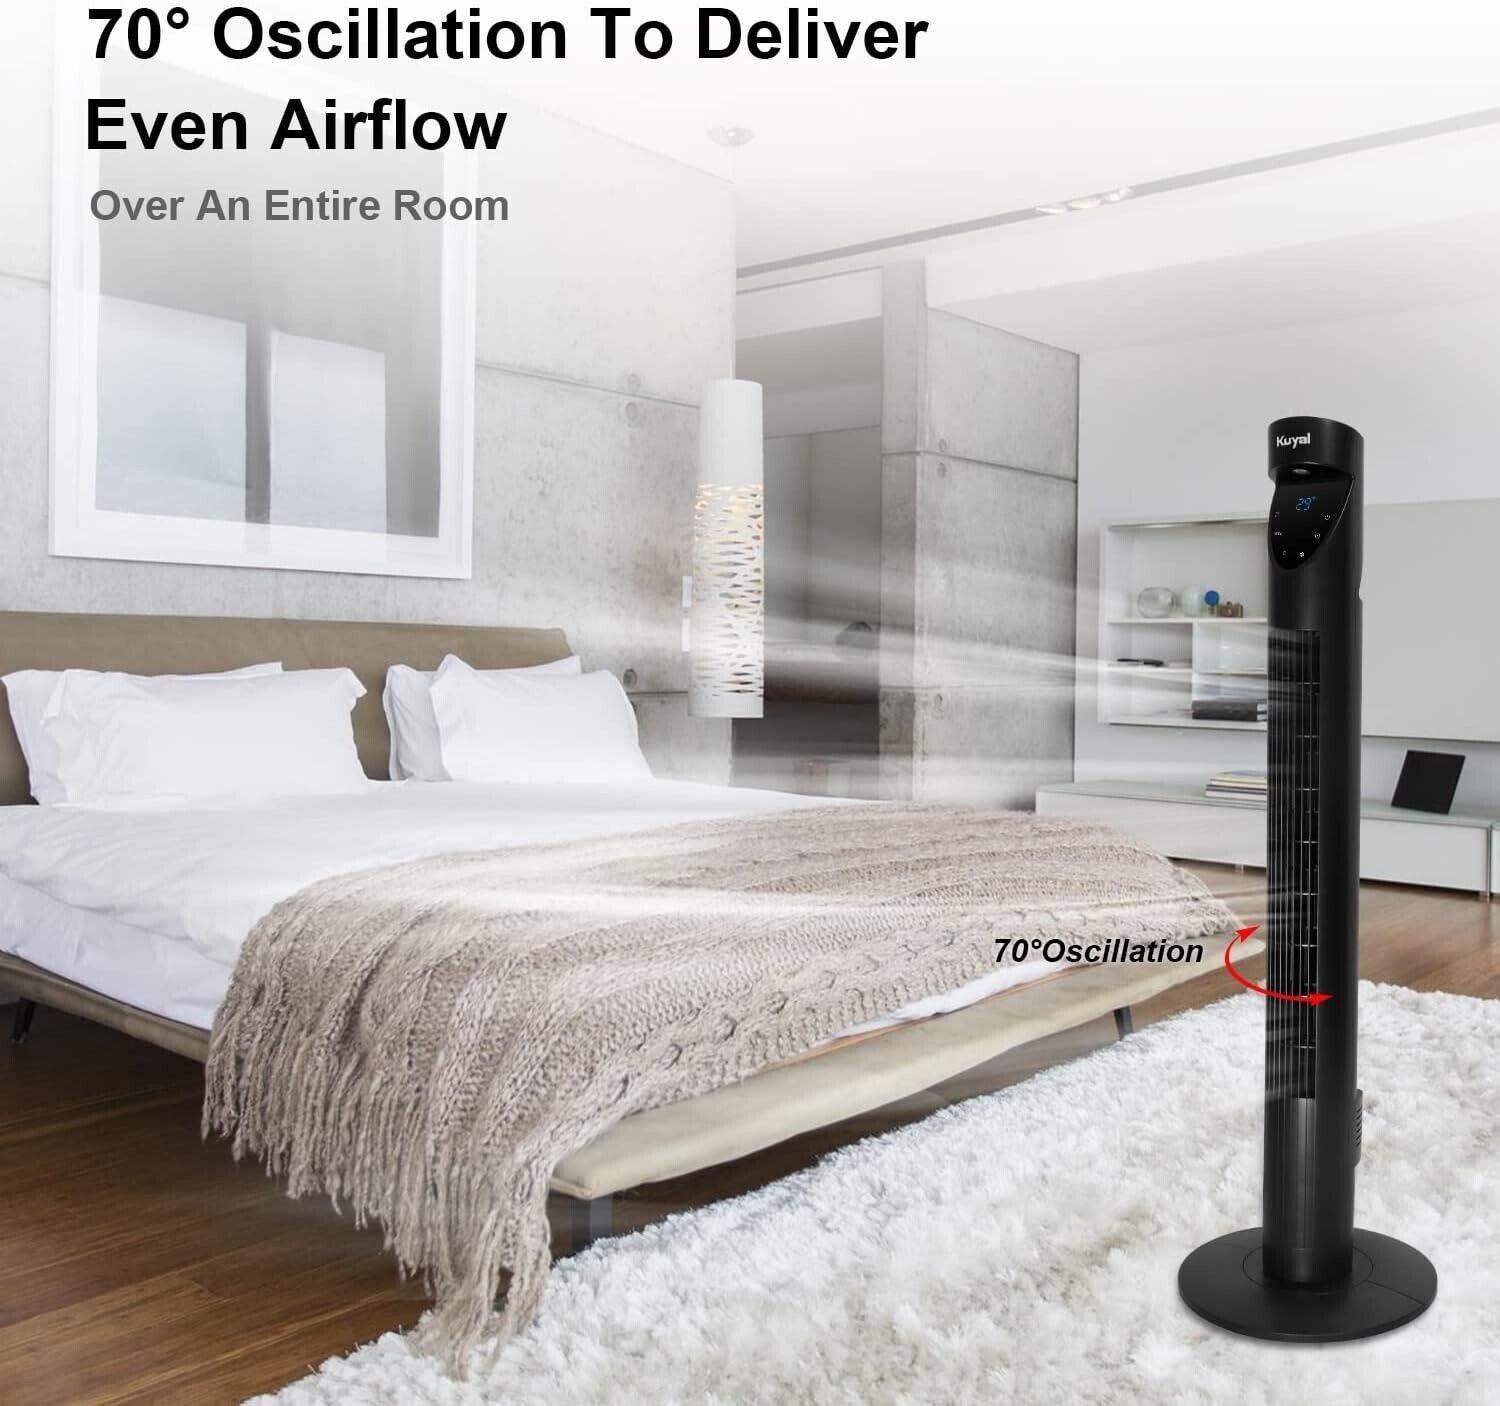 Kuyal Tower fan 36 Inch, Floor Fan With Remote Control - Oscillating, Portable - Massive Discounts